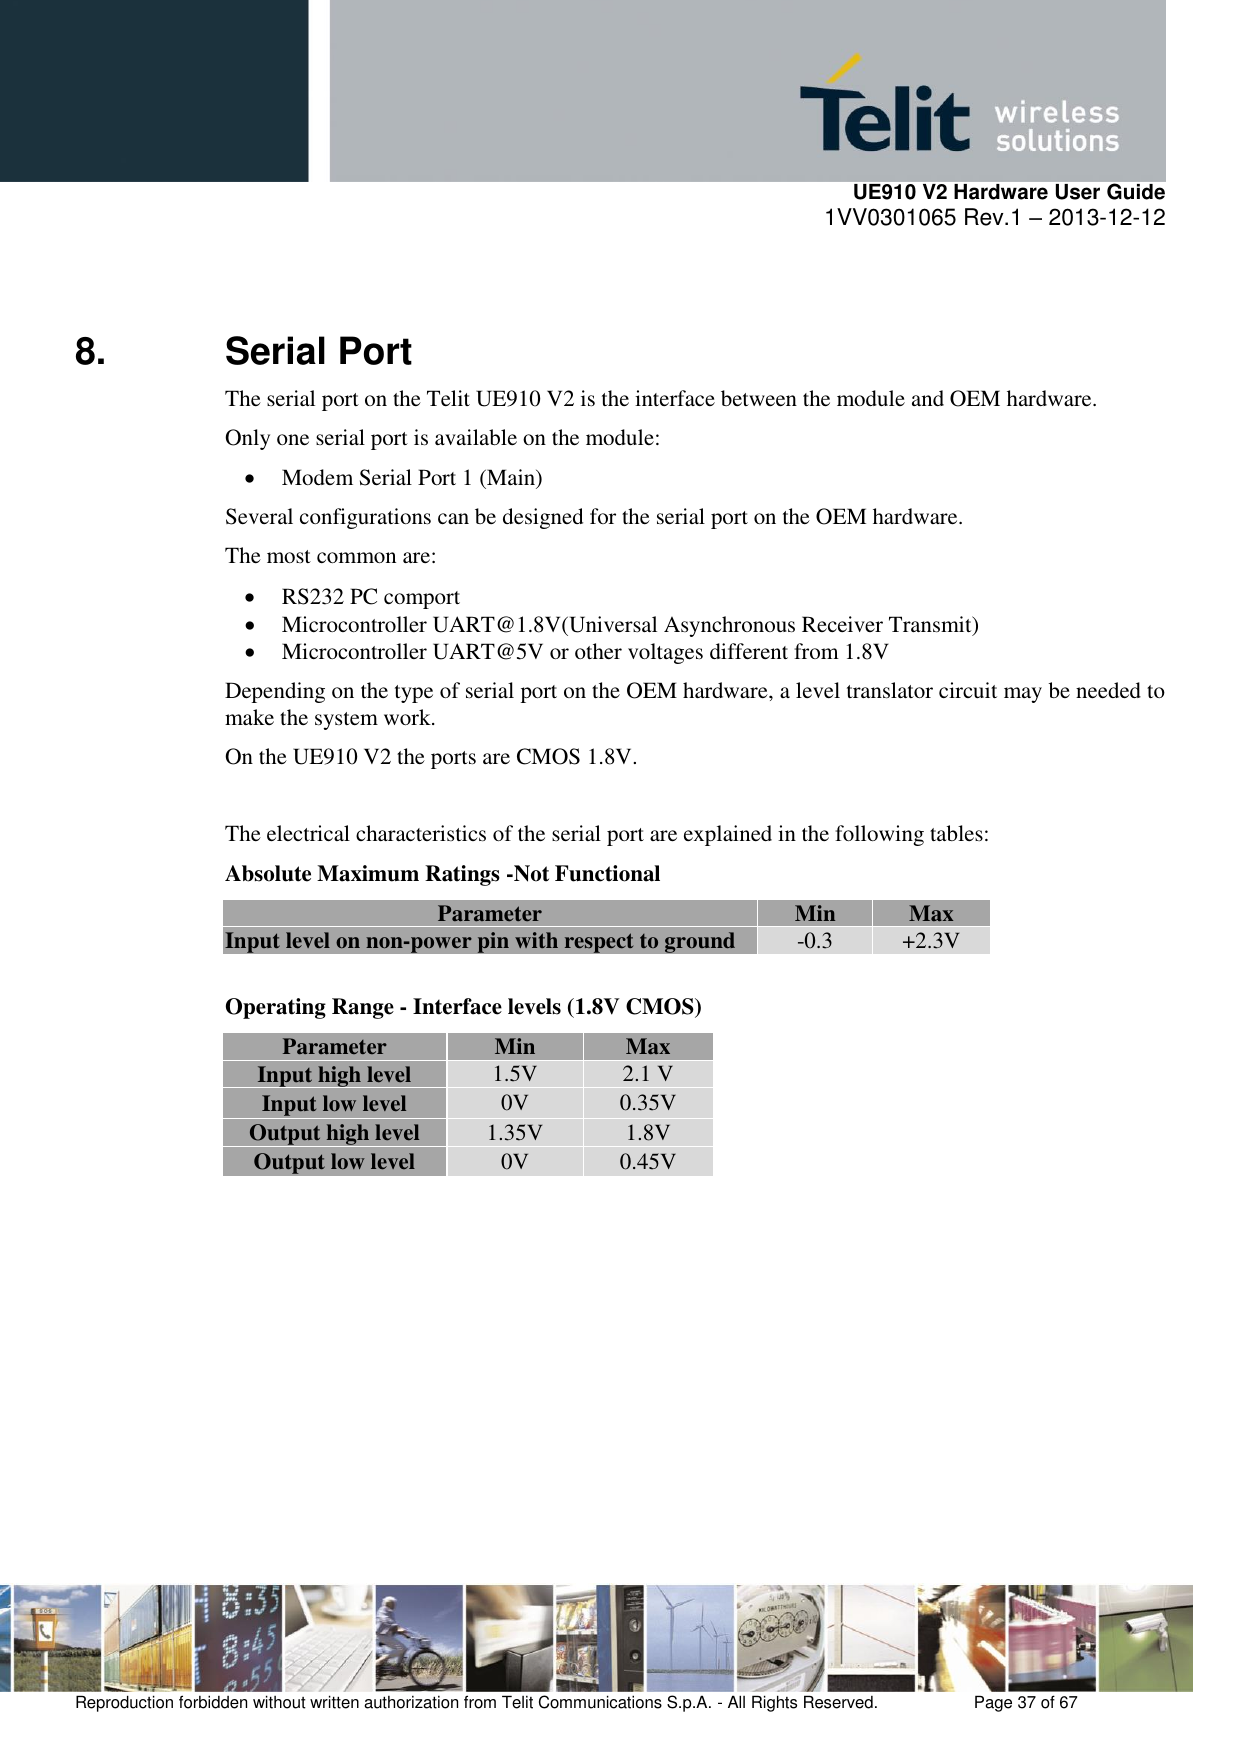     UE910 V2 Hardware User Guide 1VV0301065 Rev.1 – 2013-12-12  Reproduction forbidden without written authorization from Telit Communications S.p.A. - All Rights Reserved.    Page 37 of 67                                                     8.  Serial Port The serial port on the Telit UE910 V2 is the interface between the module and OEM hardware.  Only one serial port is available on the module:  Modem Serial Port 1 (Main) Several configurations can be designed for the serial port on the OEM hardware.  The most common are:  RS232 PC comport  Microcontroller UART@1.8V(Universal Asynchronous Receiver Transmit)  Microcontroller UART@5V or other voltages different from 1.8V Depending on the type of serial port on the OEM hardware, a level translator circuit may be needed to make the system work.  On the UE910 V2 the ports are CMOS 1.8V.   The electrical characteristics of the serial port are explained in the following tables: Absolute Maximum Ratings -Not Functional Parameter Min Max Input level on non-power pin with respect to ground -0.3 +2.3V  Operating Range - Interface levels (1.8V CMOS) Parameter Min Max Input high level 1.5V 2.1 V Input low level 0V 0.35V Output high level 1.35V 1.8V Output low level 0V 0.45V       